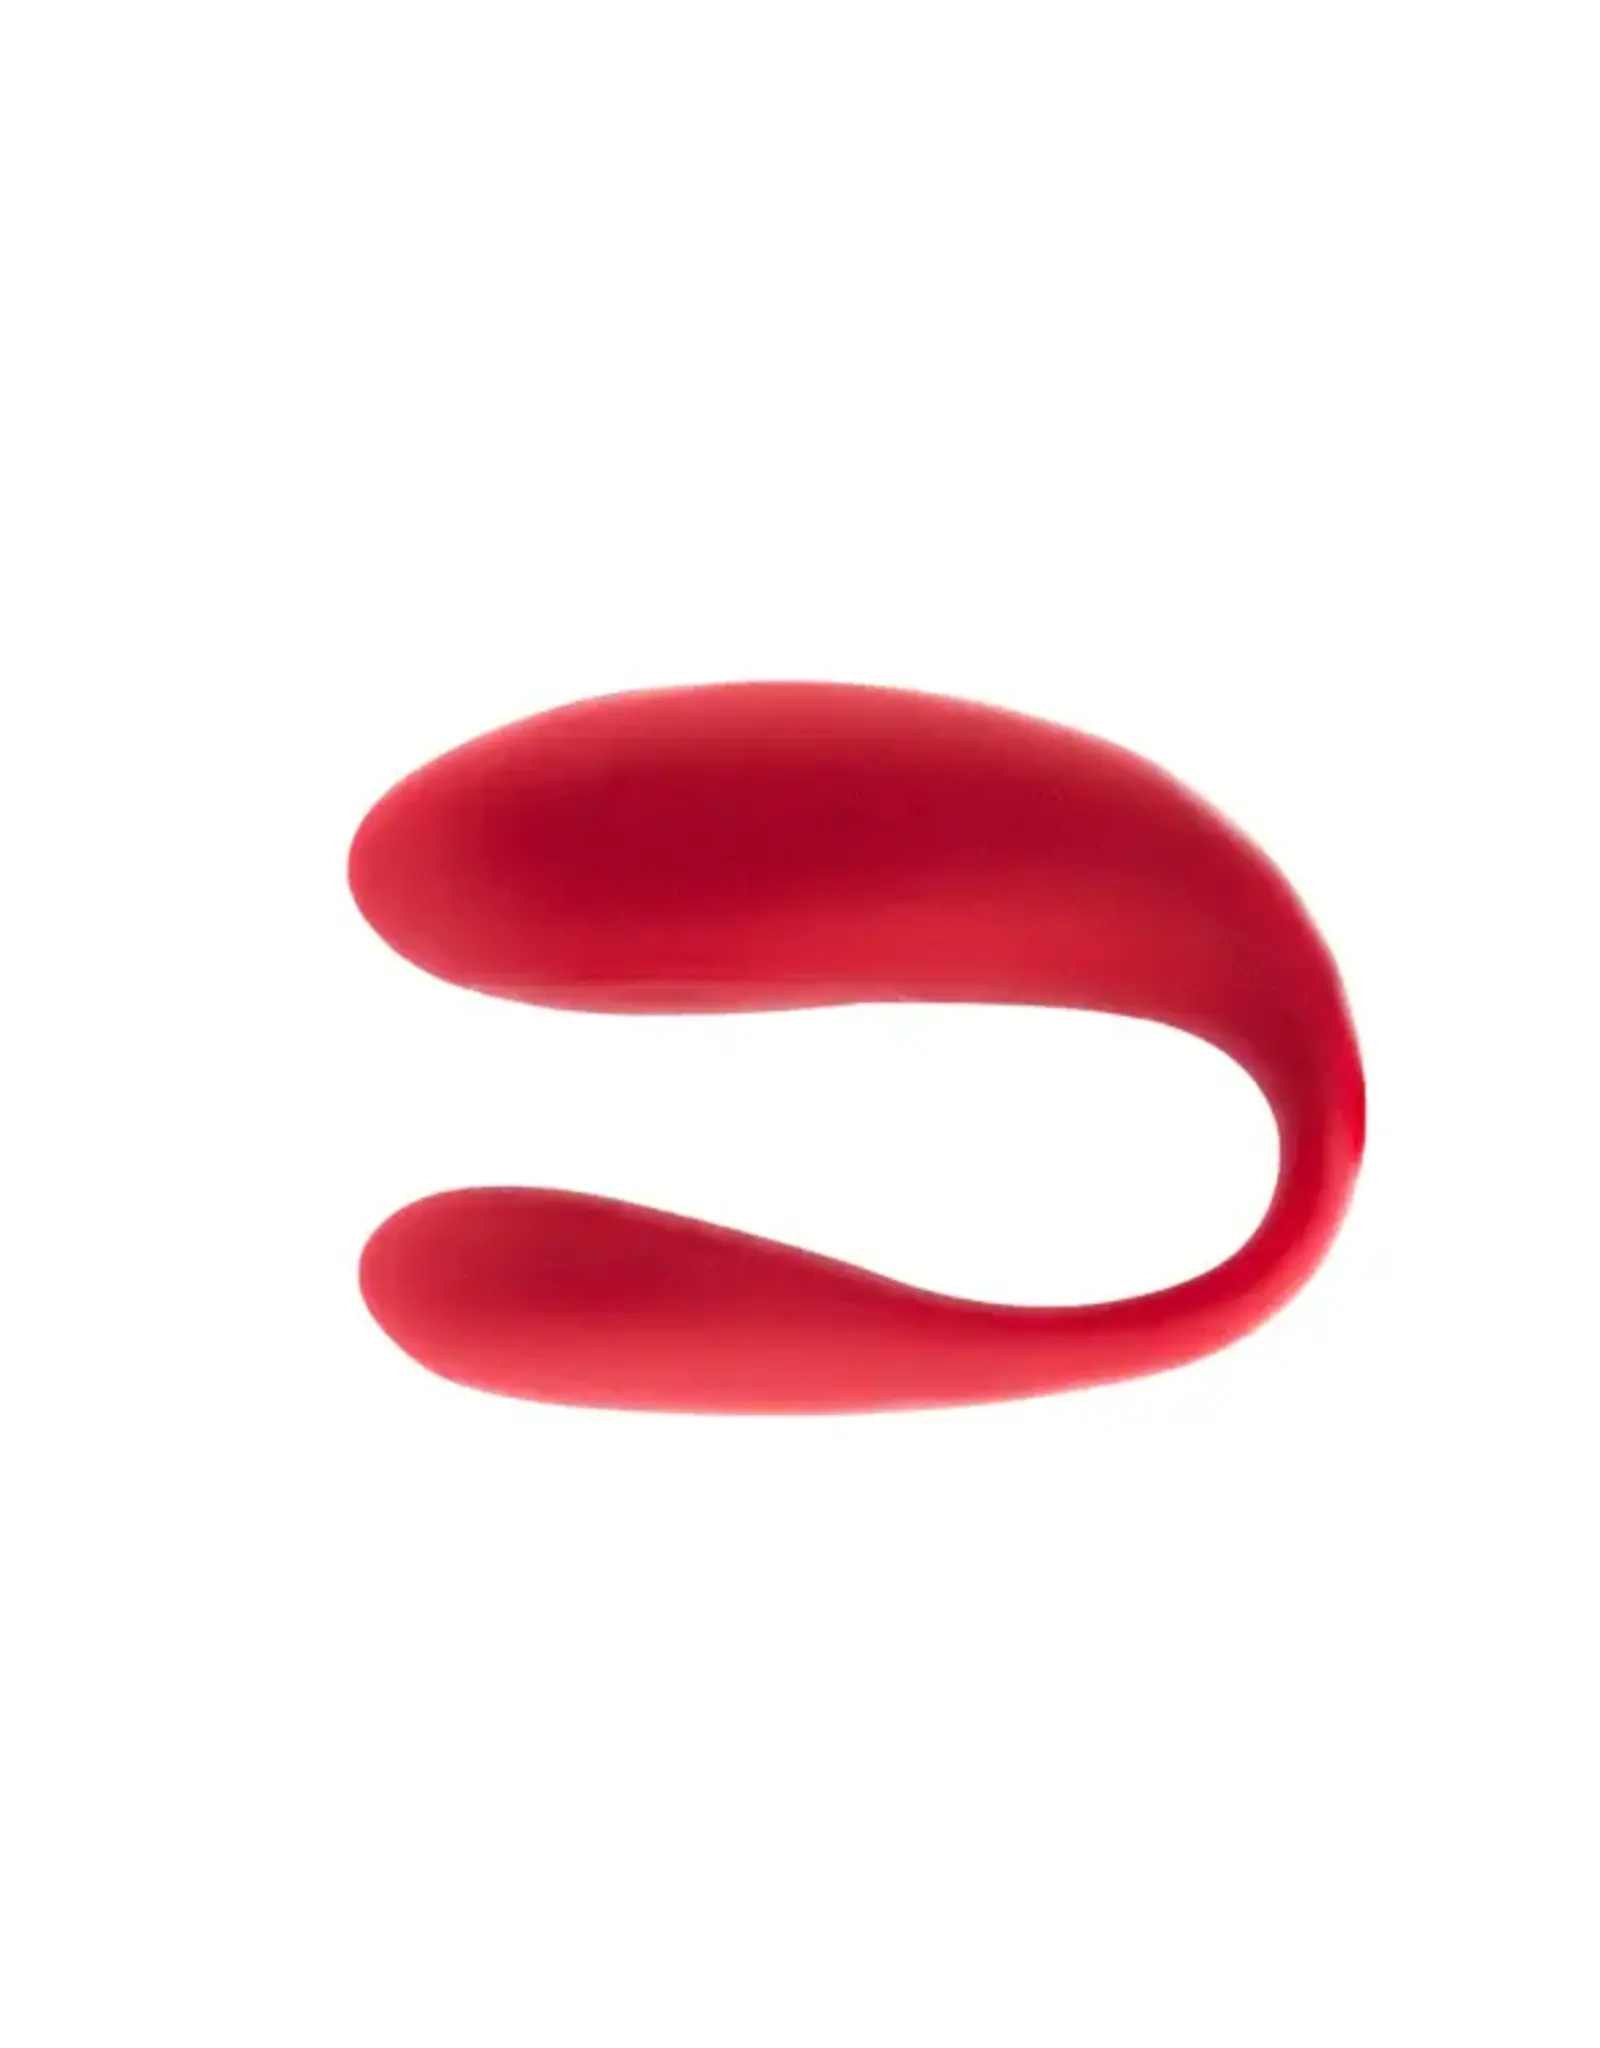 WE-VIBE We-Vibe - Special Edition Couples Vibrator